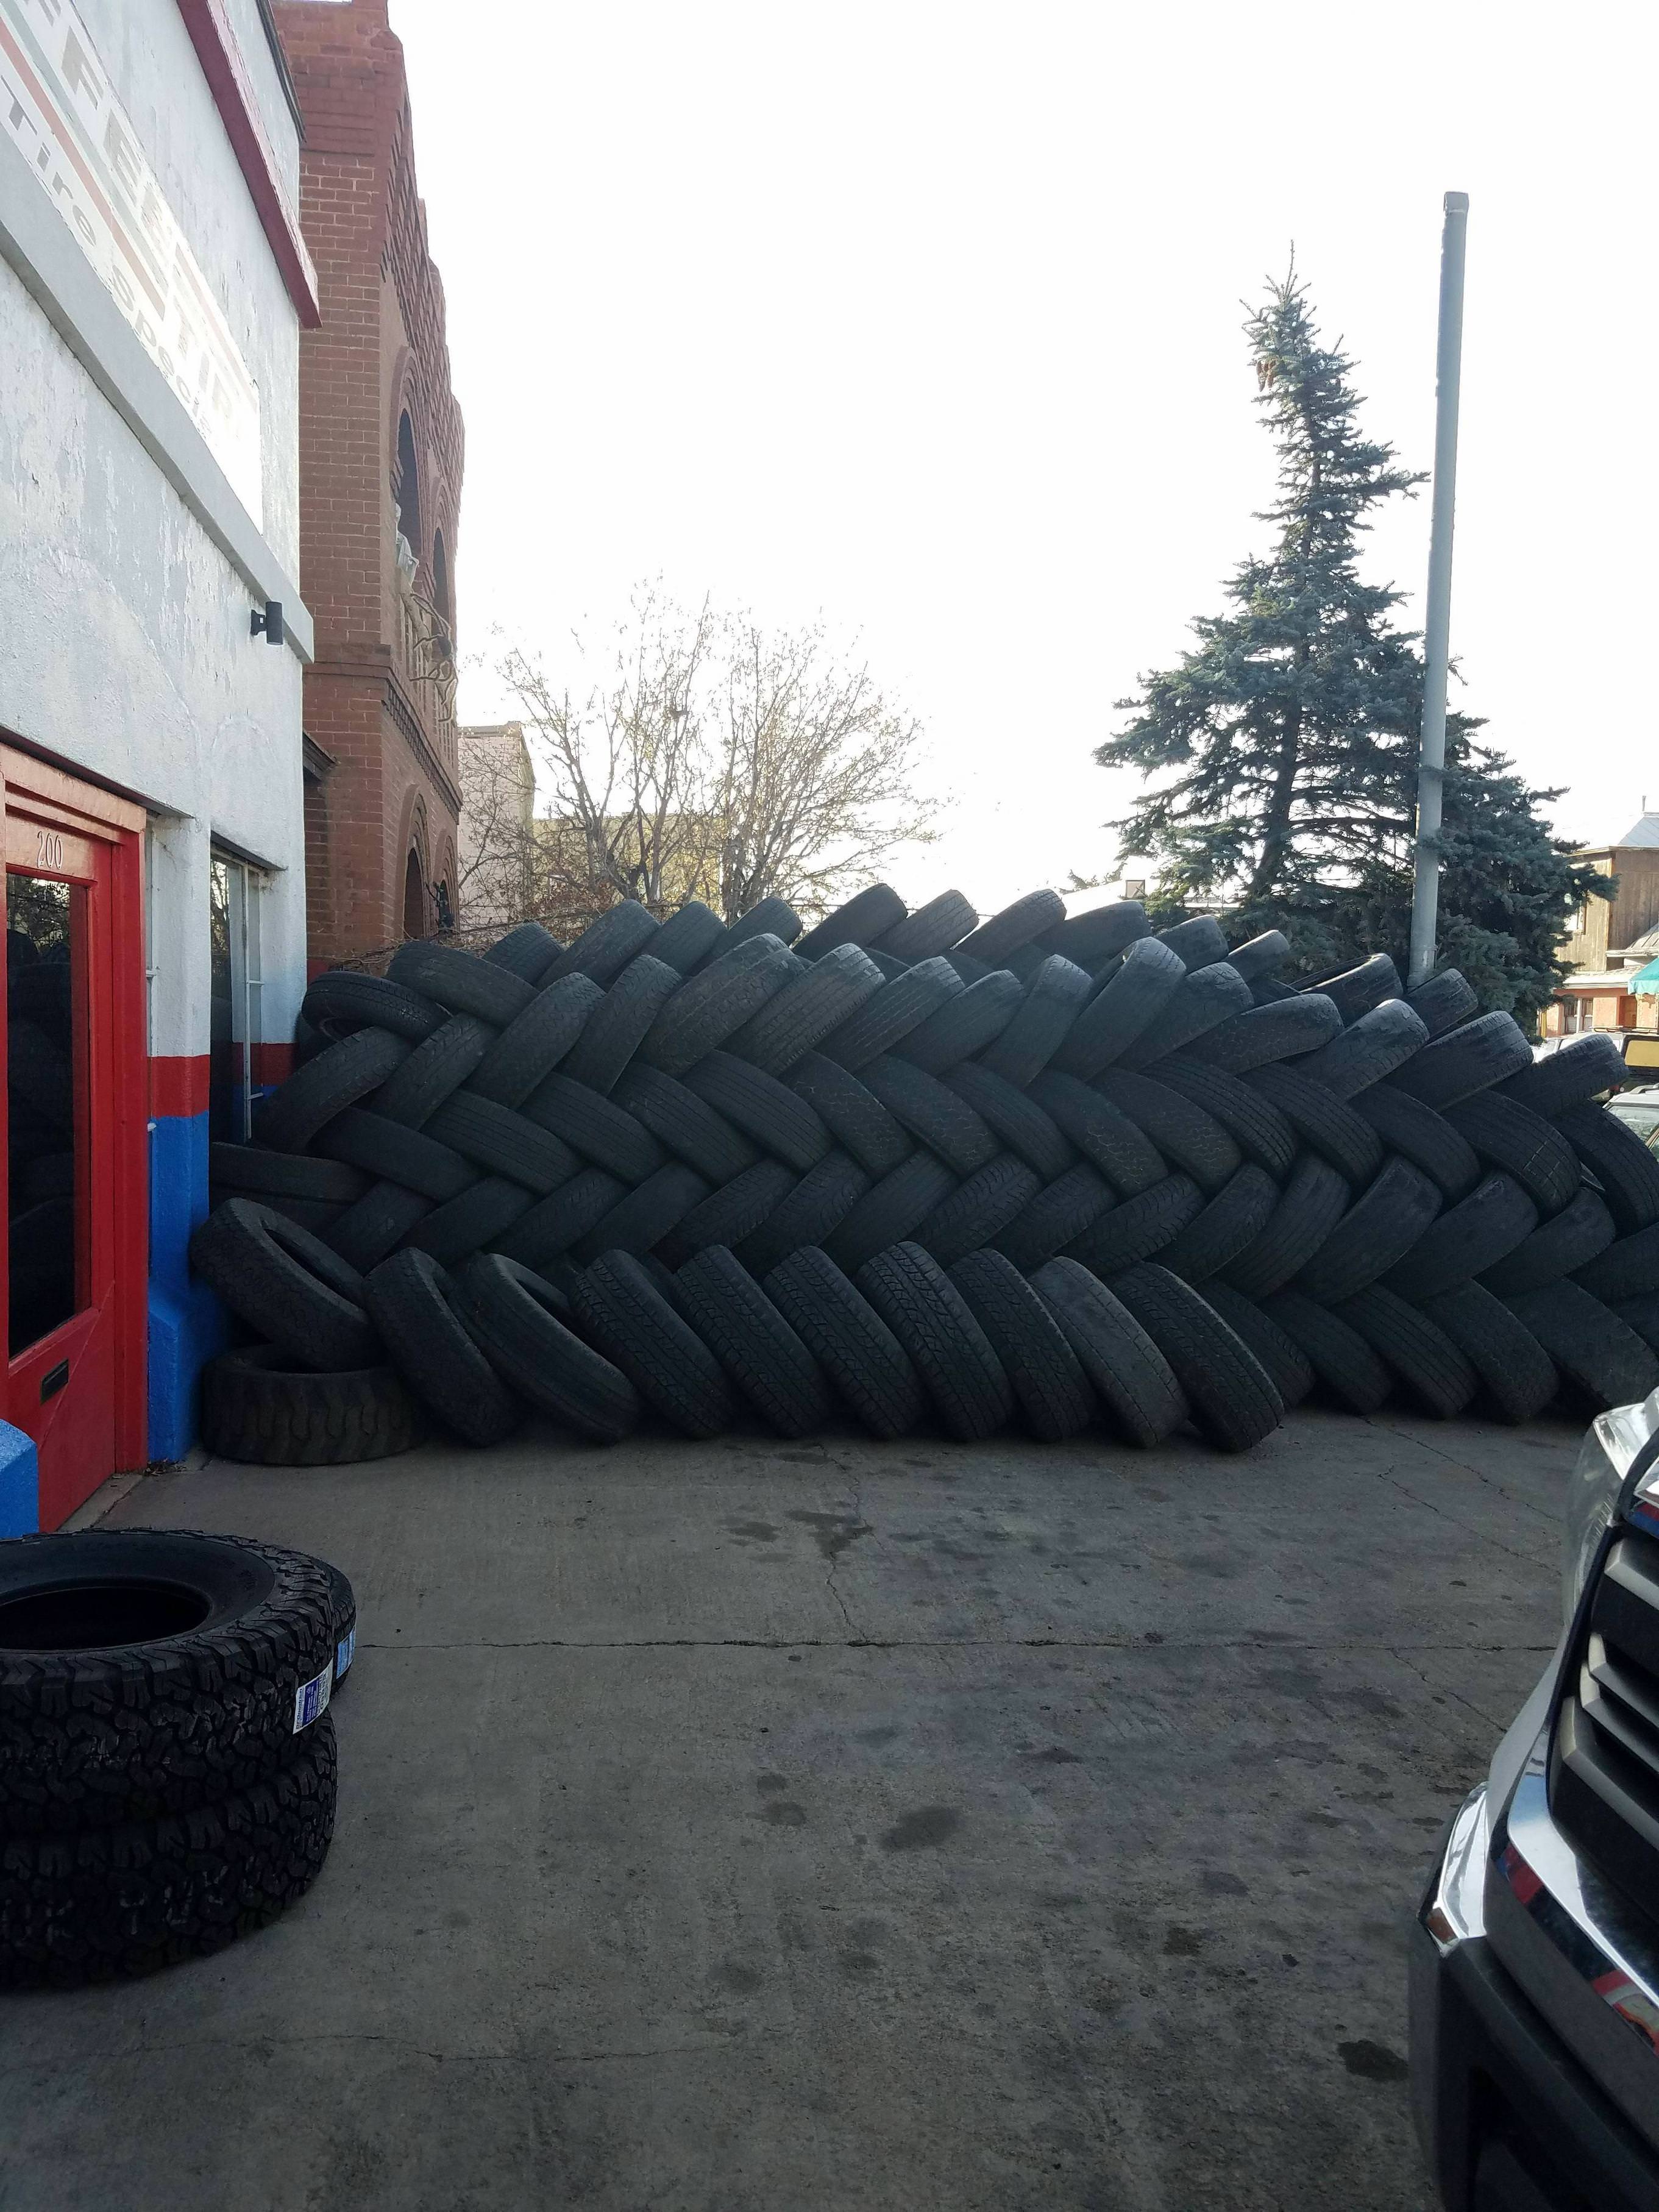 This stack of tires. - Imgur